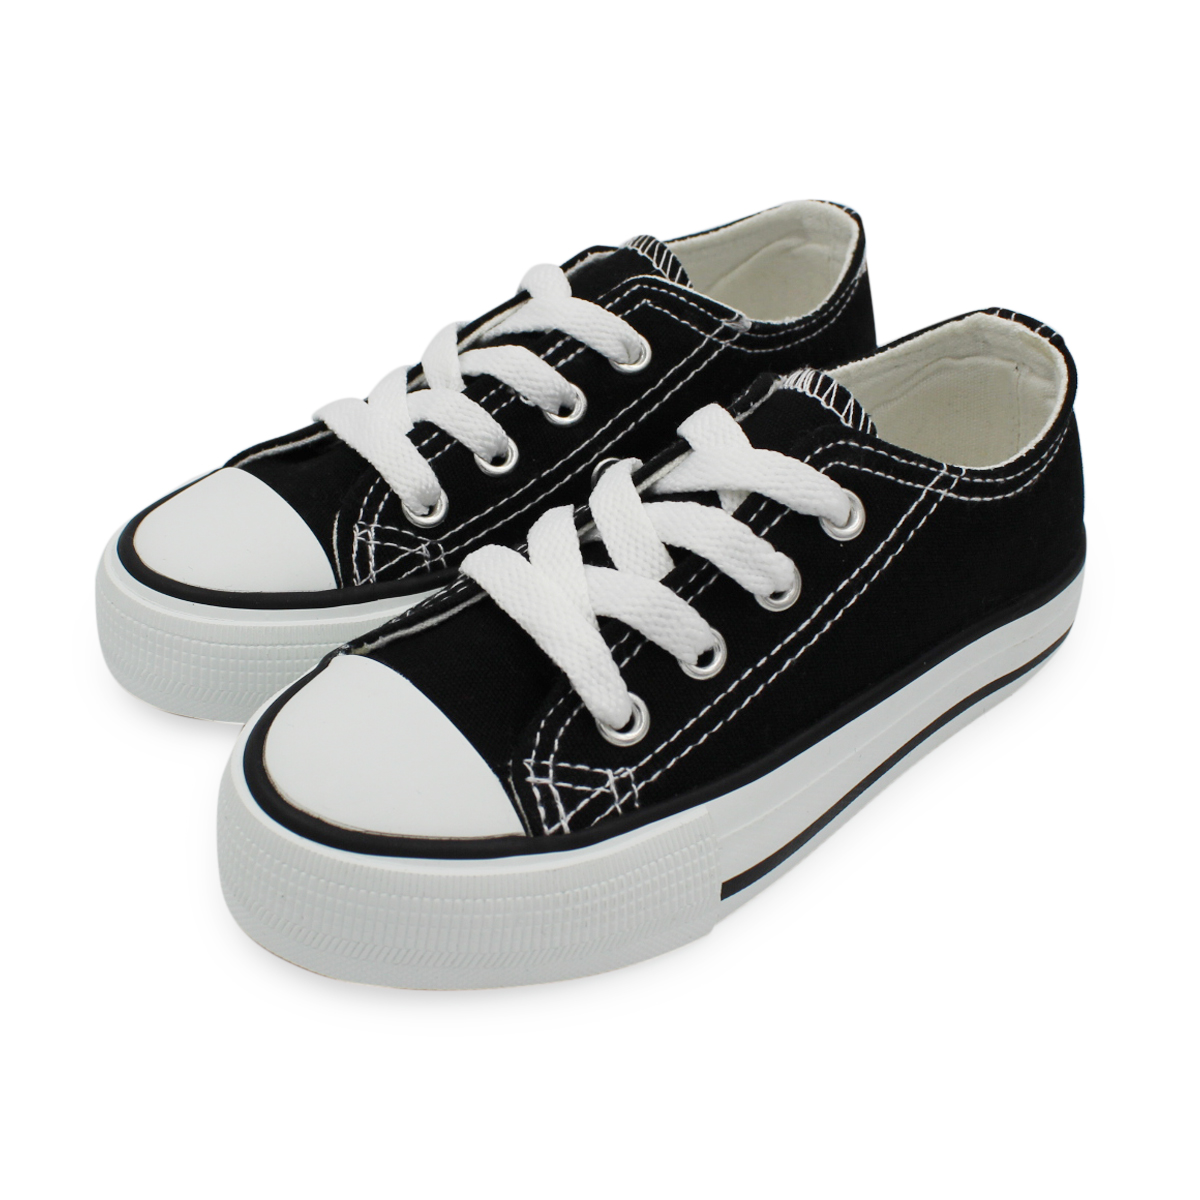 New Toddler Classic Lace Up Canvas Low Top Sneakers Unisex Boys Girls ...